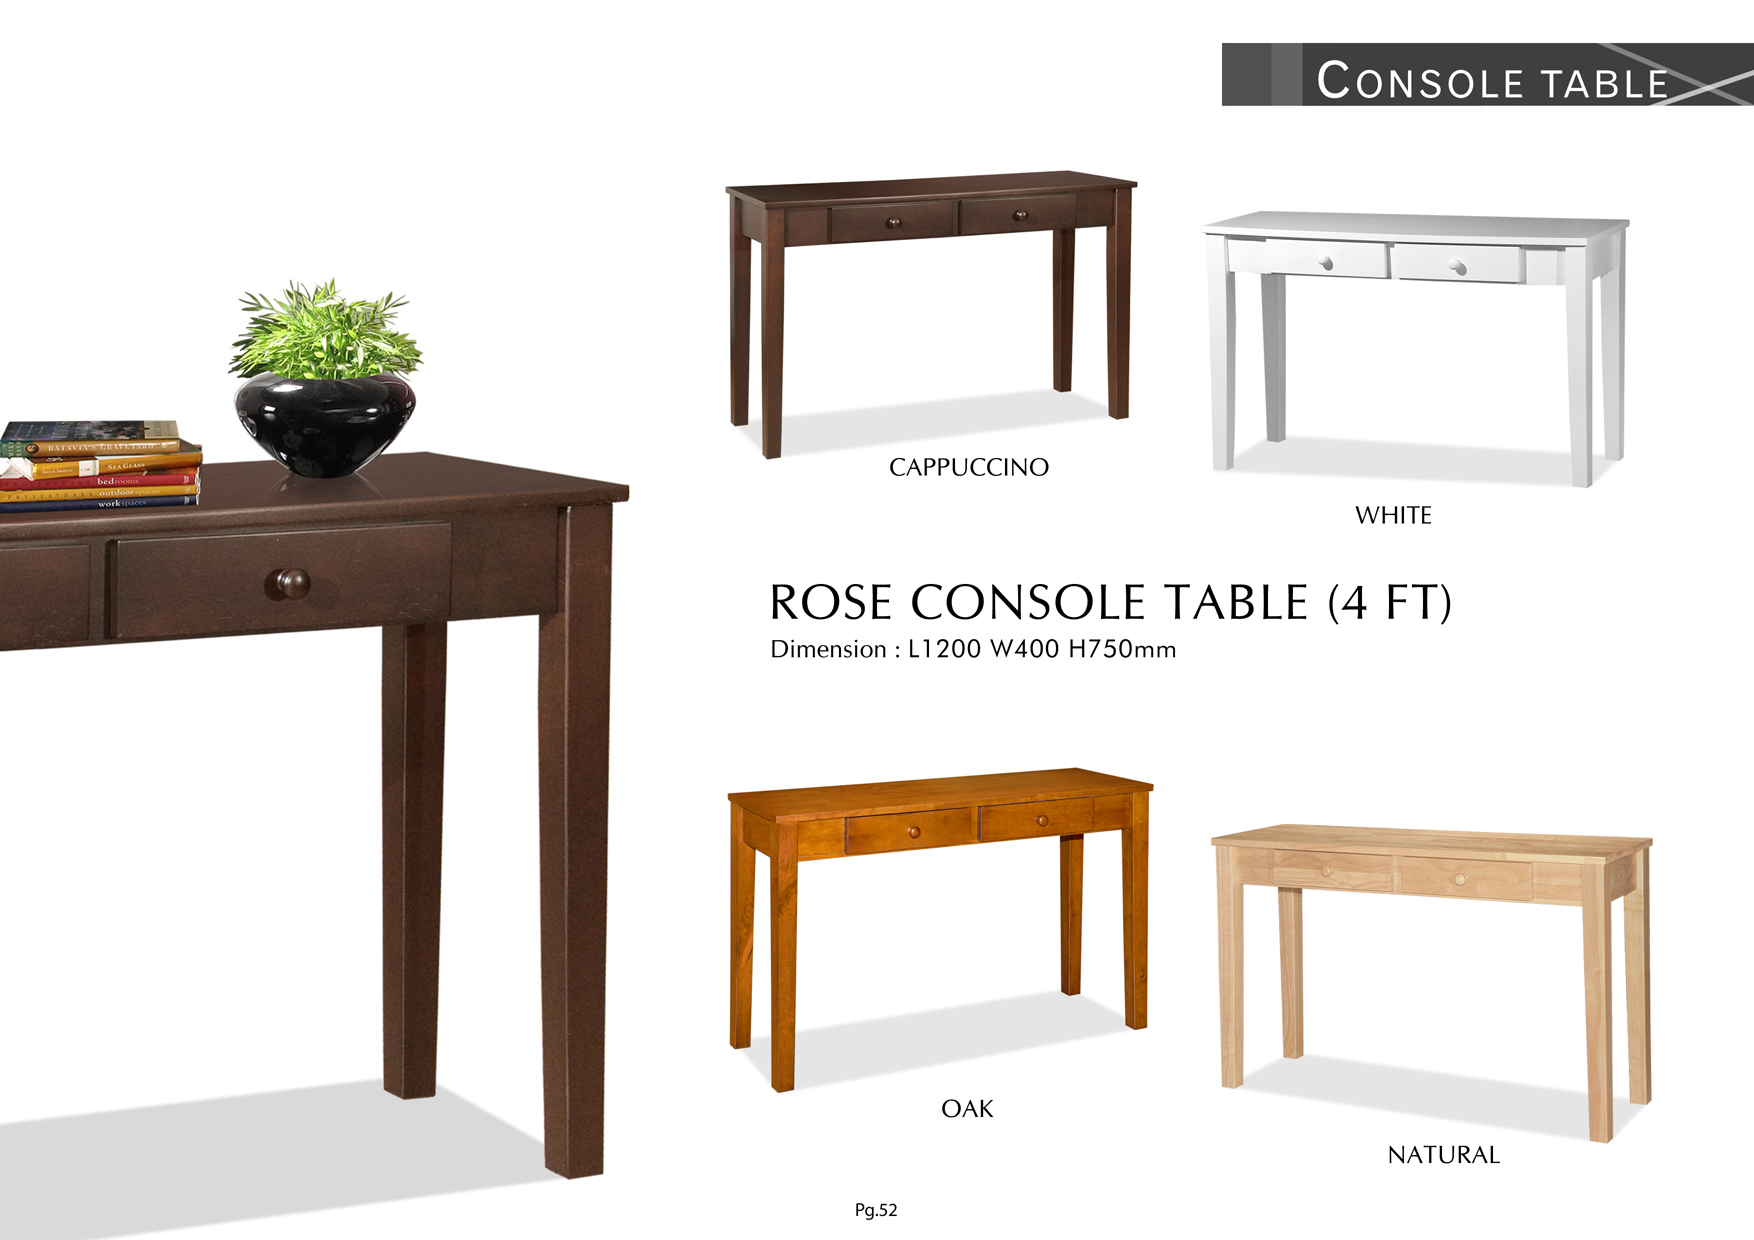 Product: PG52. ROSE CONSOLE TABLE 4FT